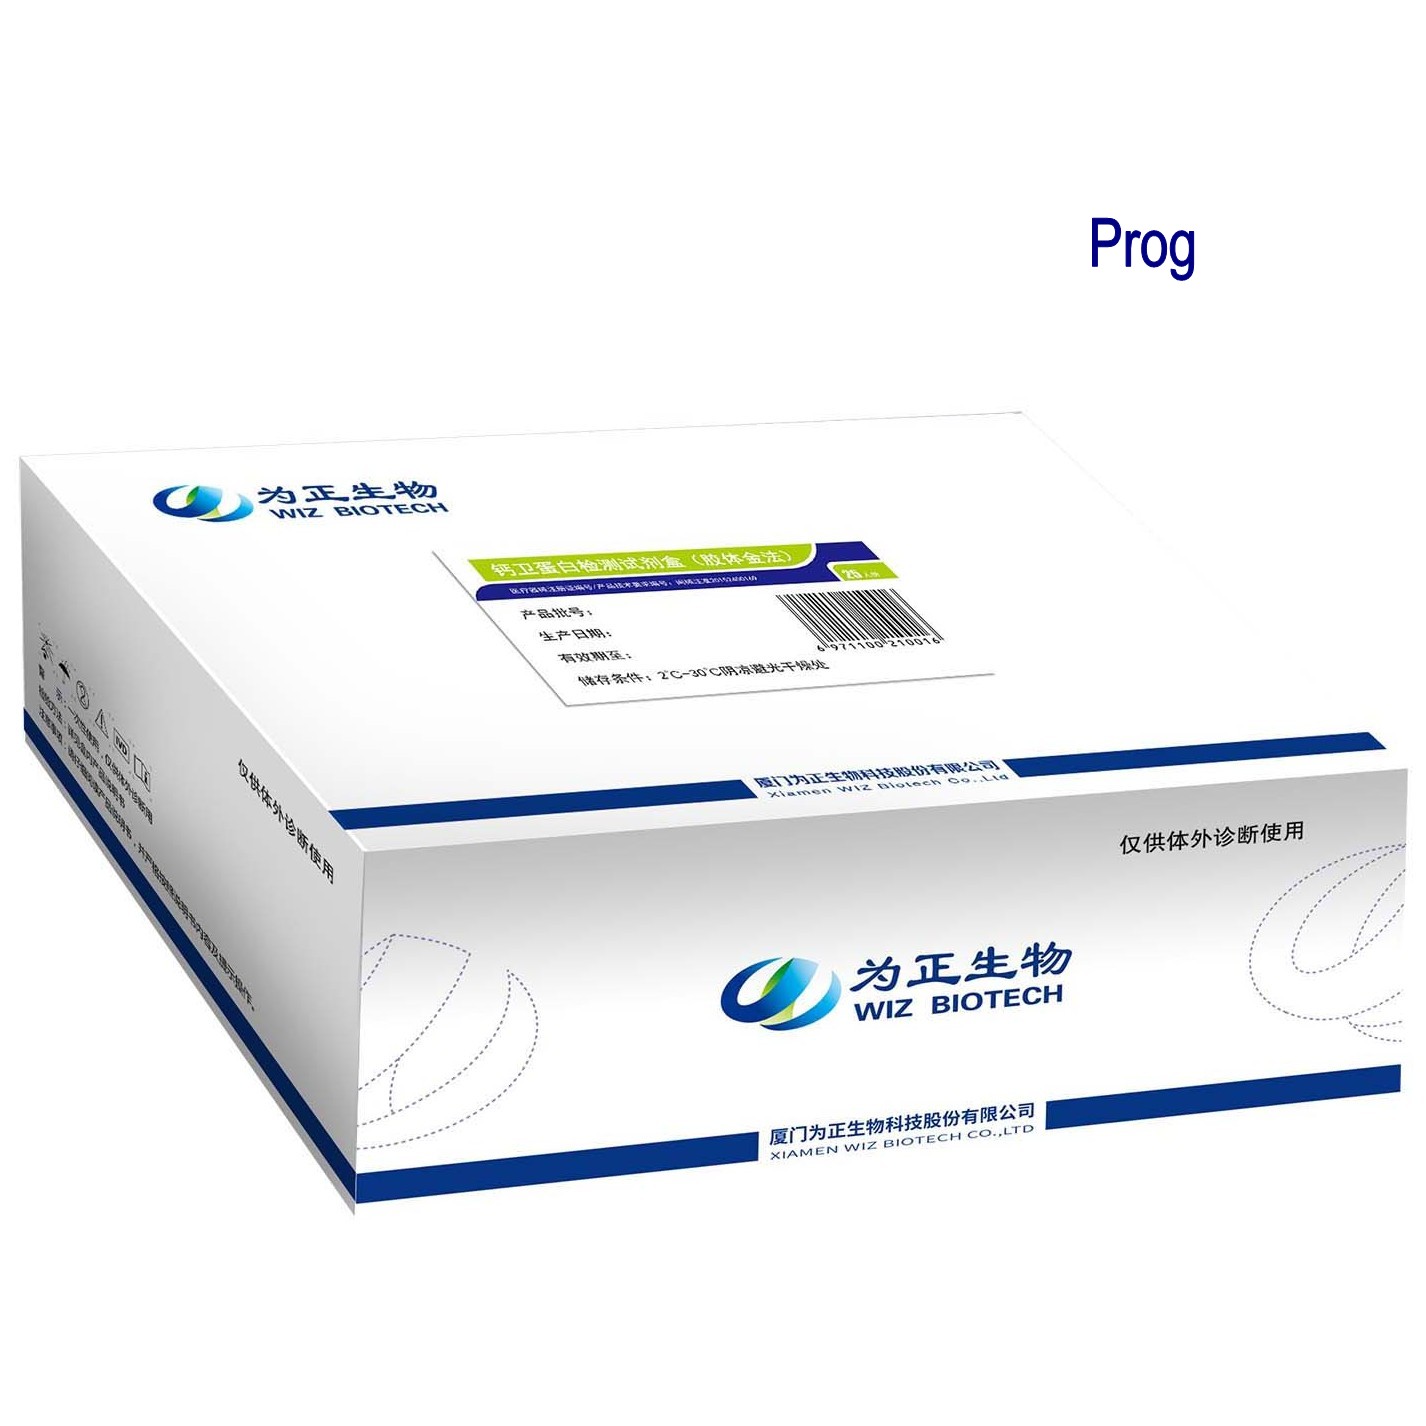 China Supplier Infectious Disase Hp Helicobacter Pylori Test - Diagnostic Kit for Progesterone (fluorescence immunochromatographic assay) – Baysen